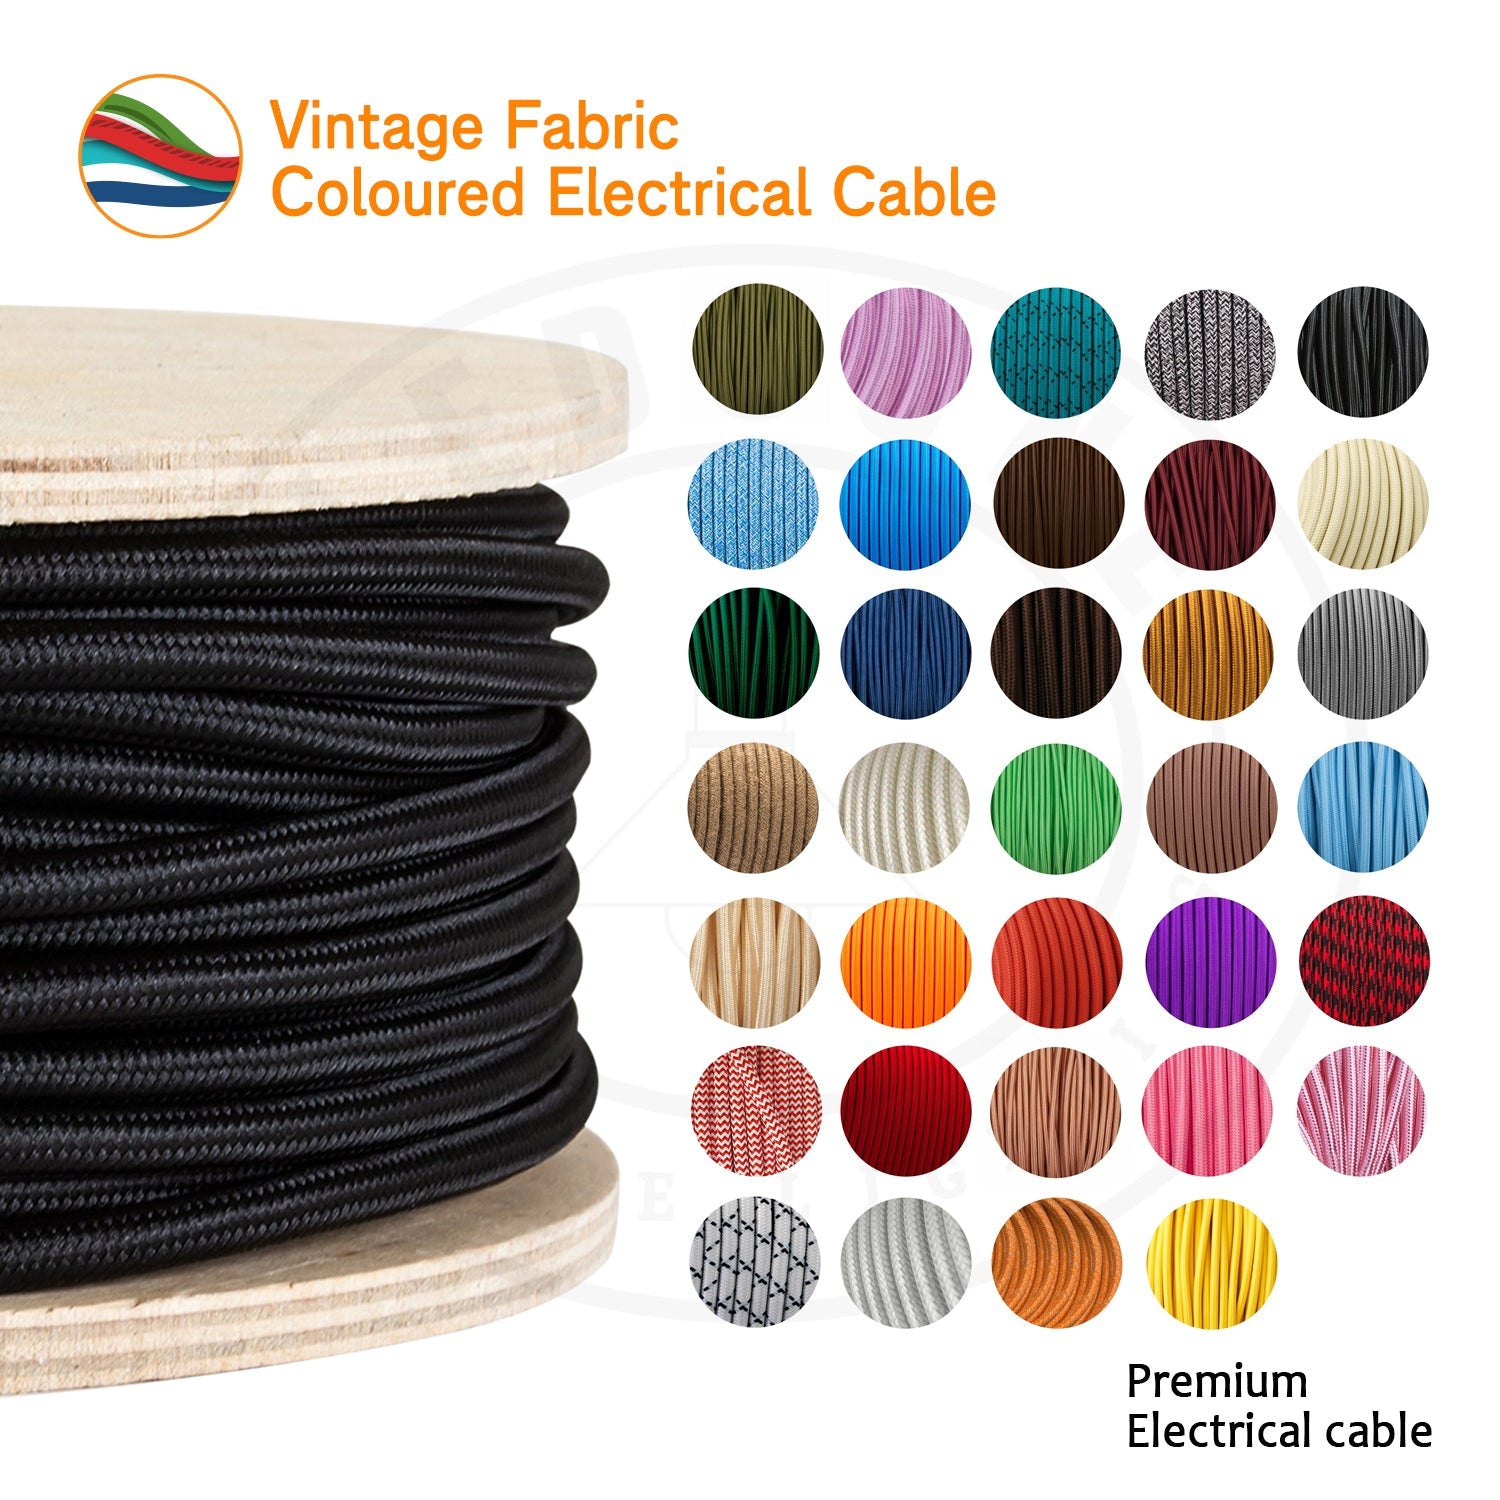  Vintage 2-core round green-braided electric cable